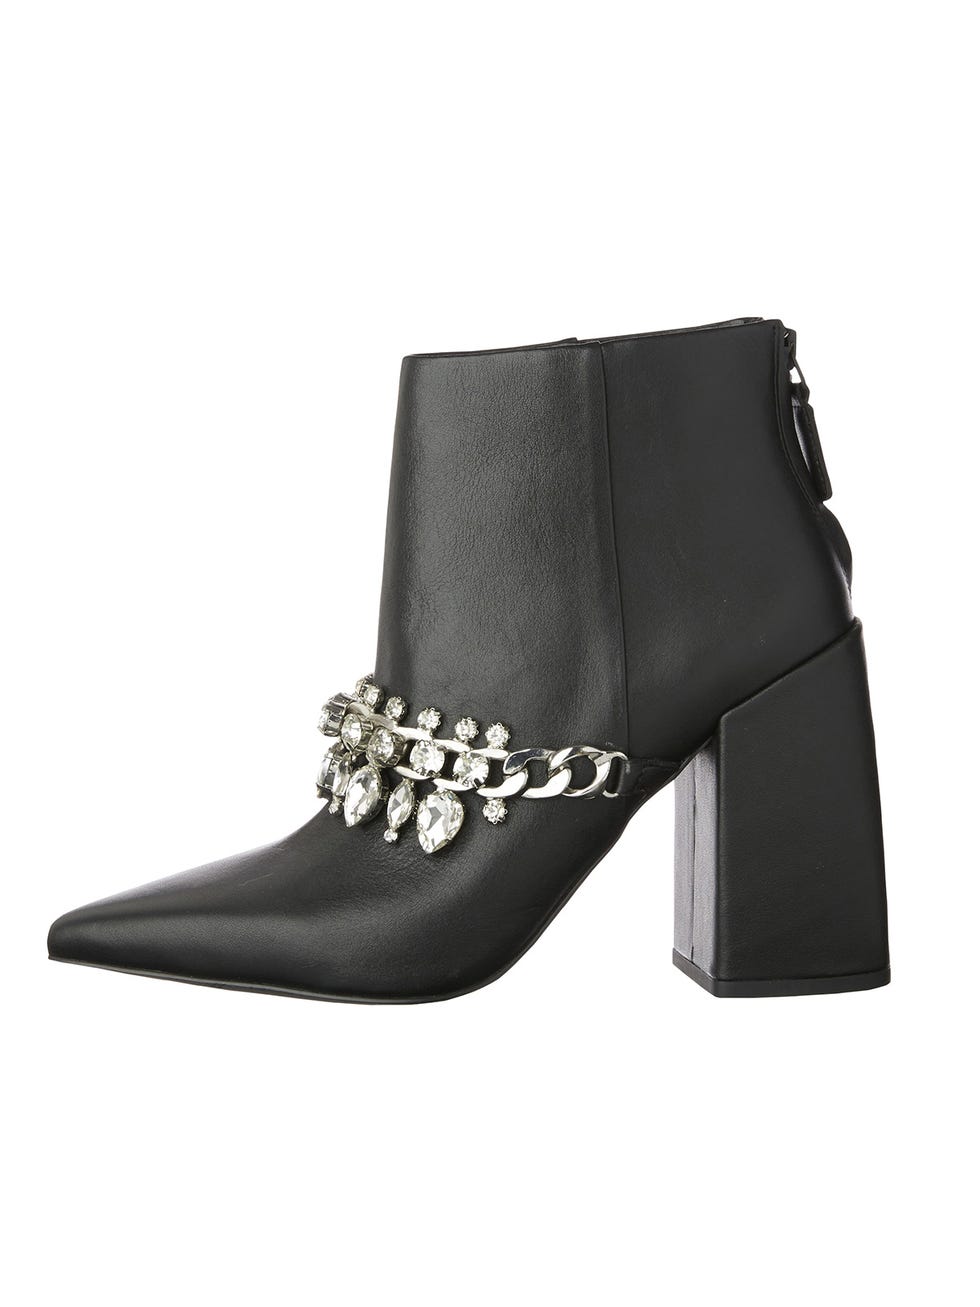 Footwear, Shoe, Boot, High heels, Joint, Leather, Buckle, Leg, Fashion accessory, Ankle, 